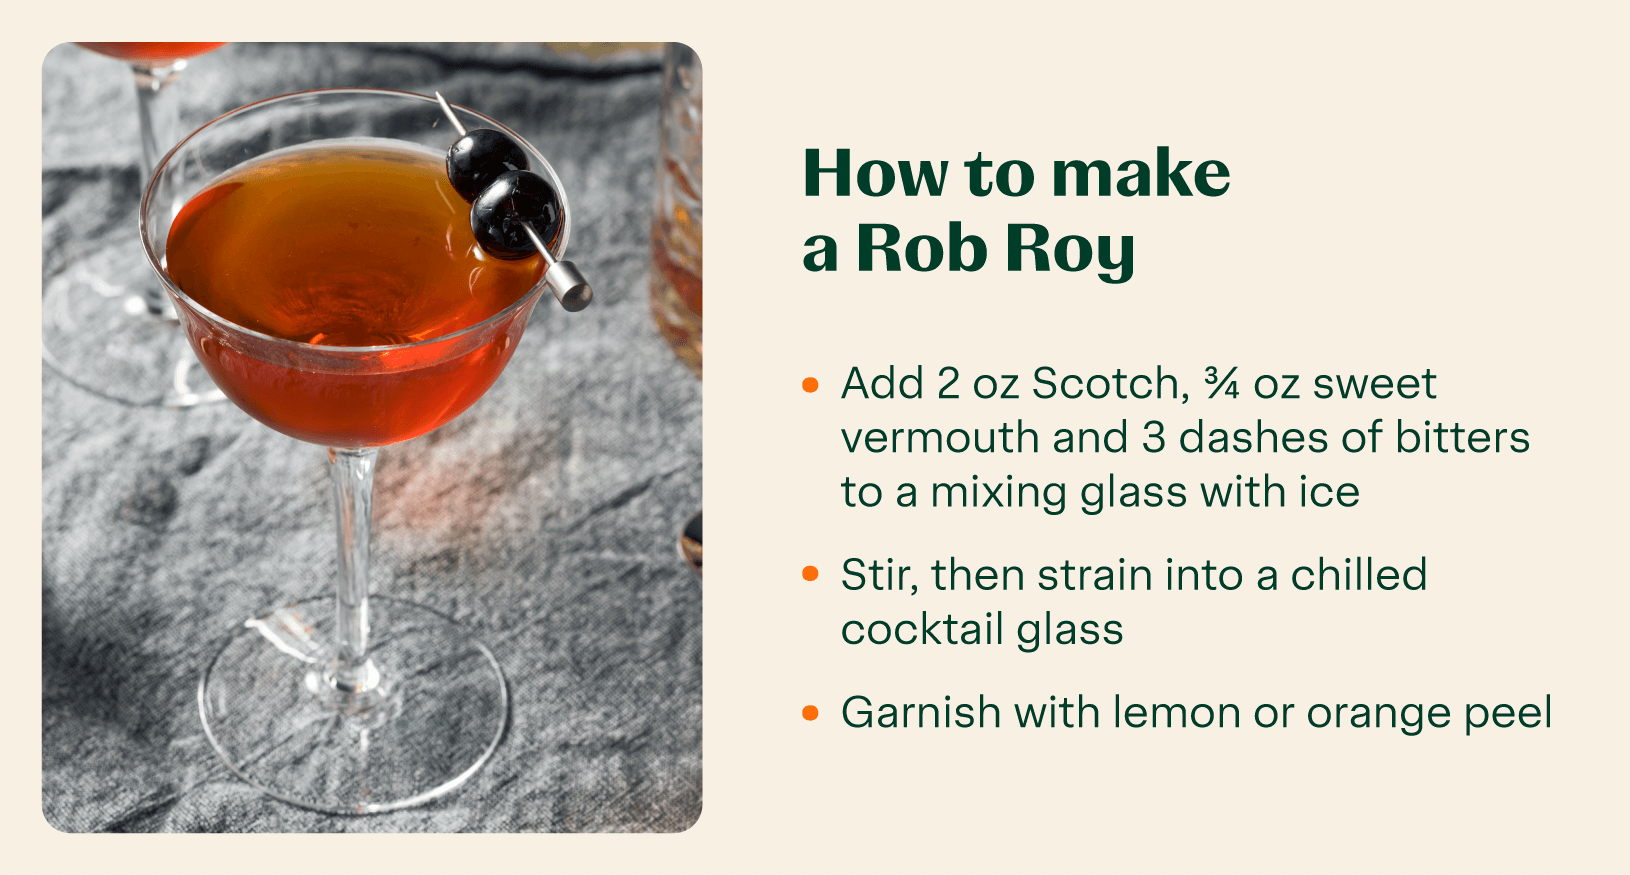 how to make a rob roy